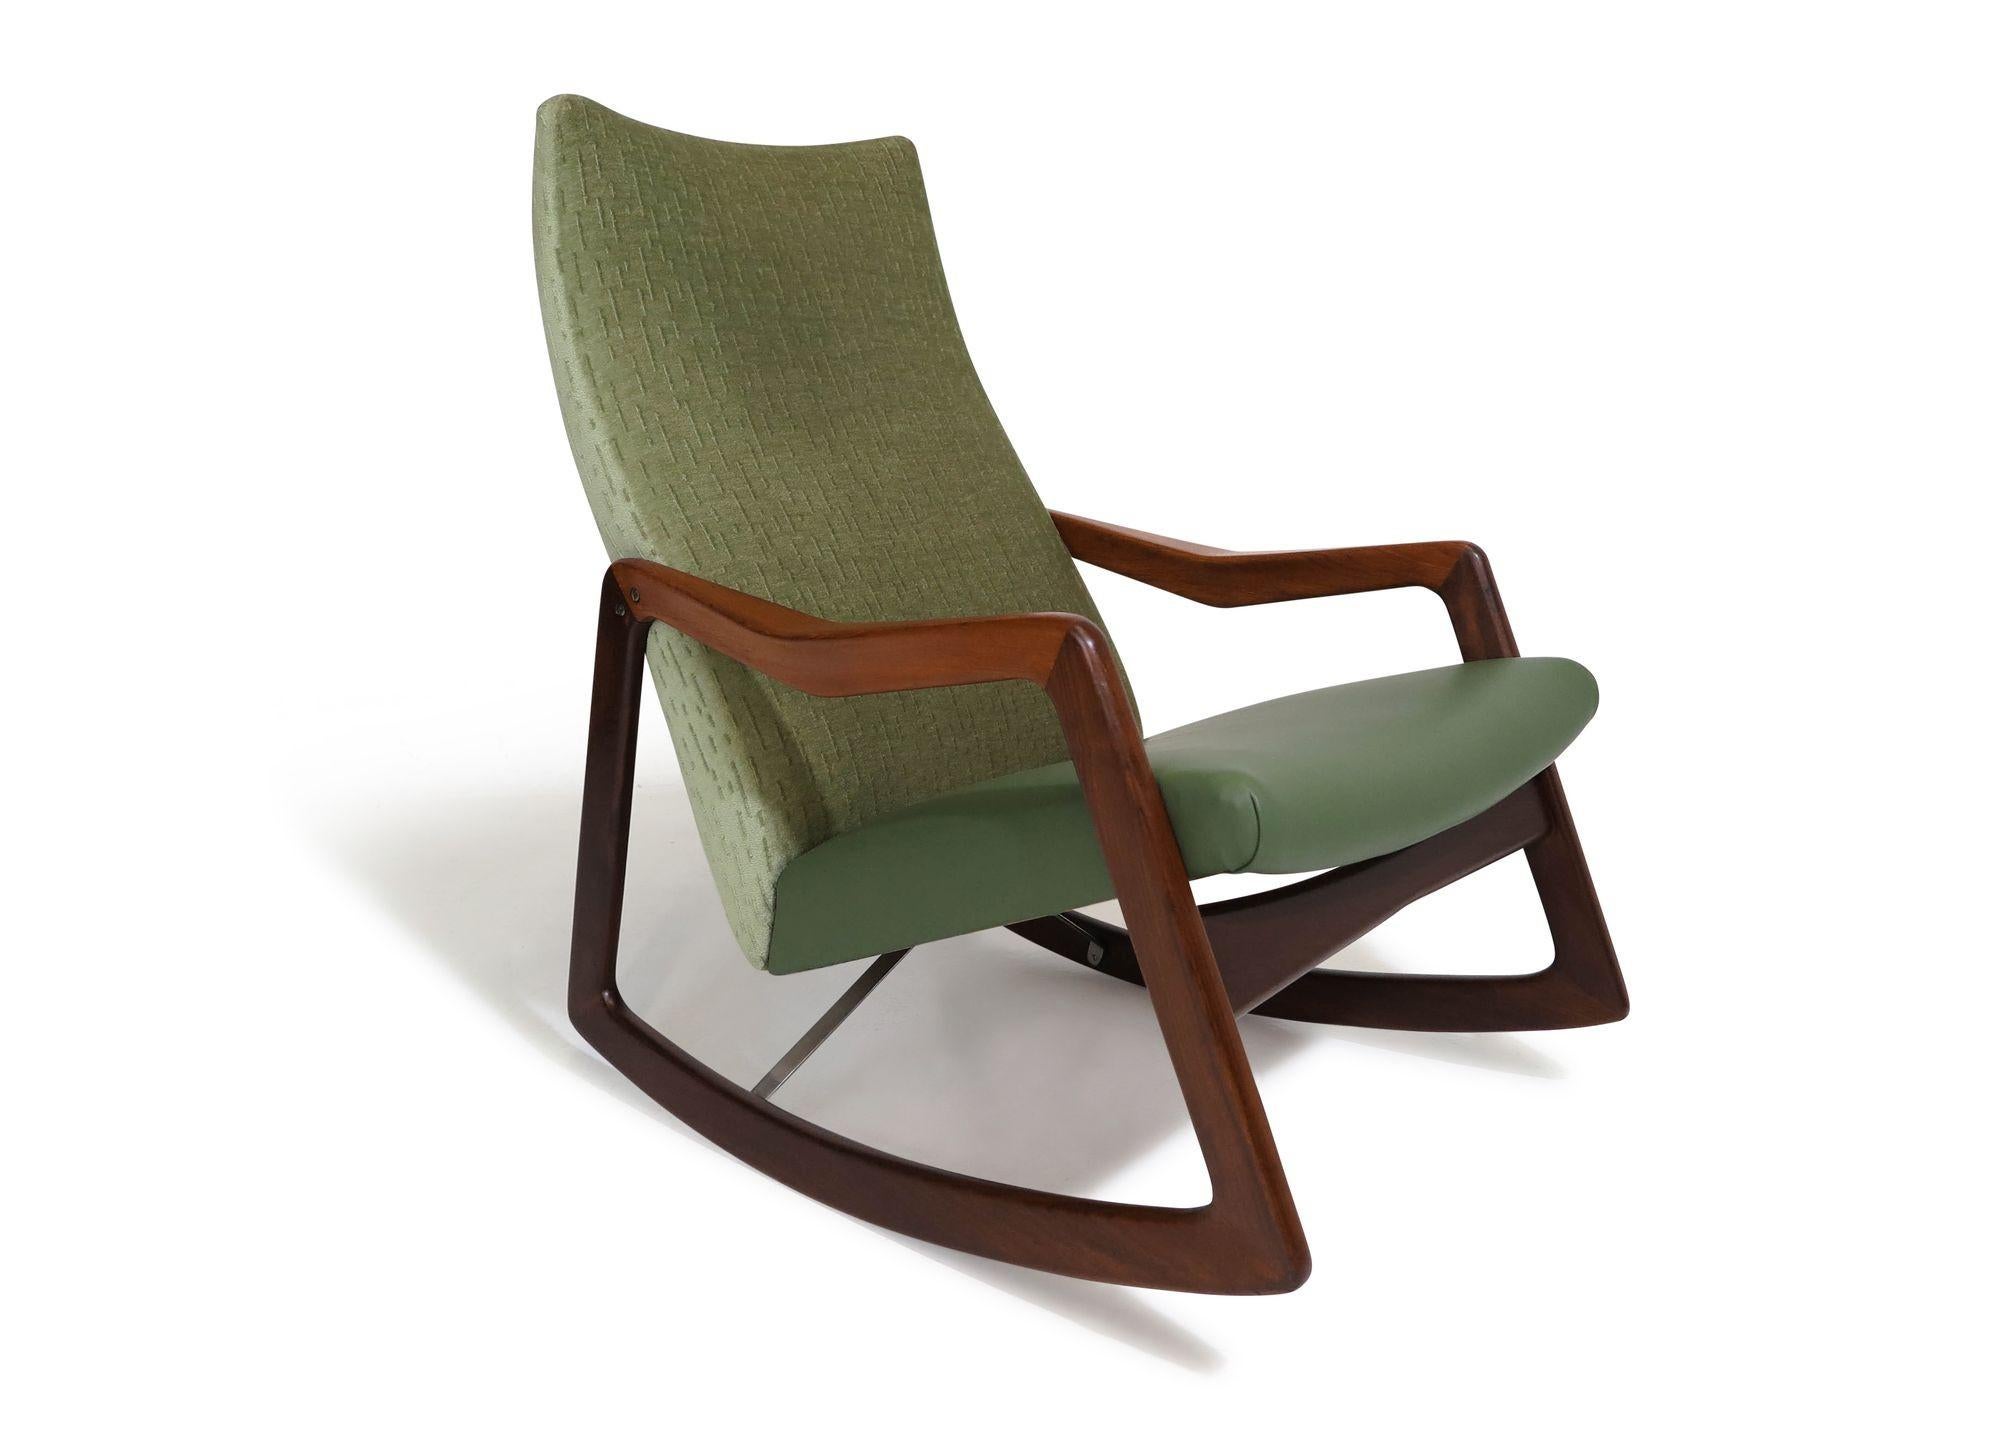 Vamo Sonderborg Danish rocking chair handcrafted of a sculpted solid teak frame with steel cross stretcher, upholstered in the original green mohair fabric and leather seat. The wood frame has been professionally restored in a natural oil finish.